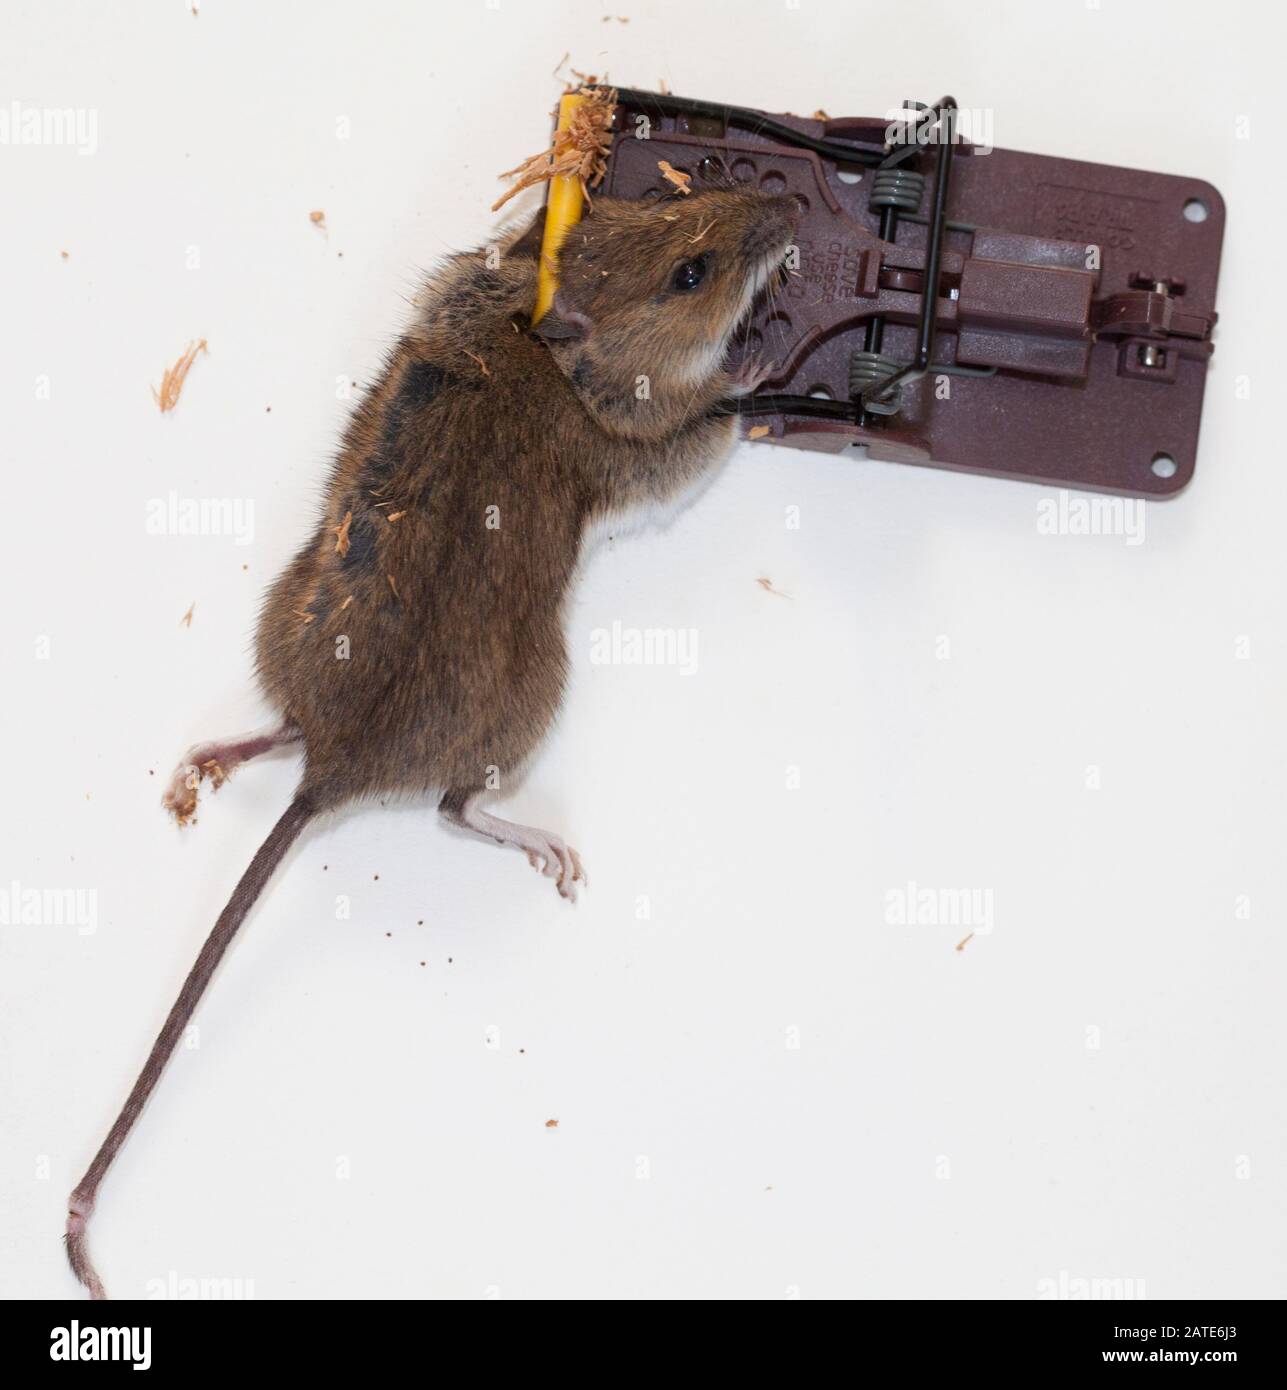 https://c8.alamy.com/comp/2ATE6J3/mouse-in-mouse-trap-2ATE6J3.jpg